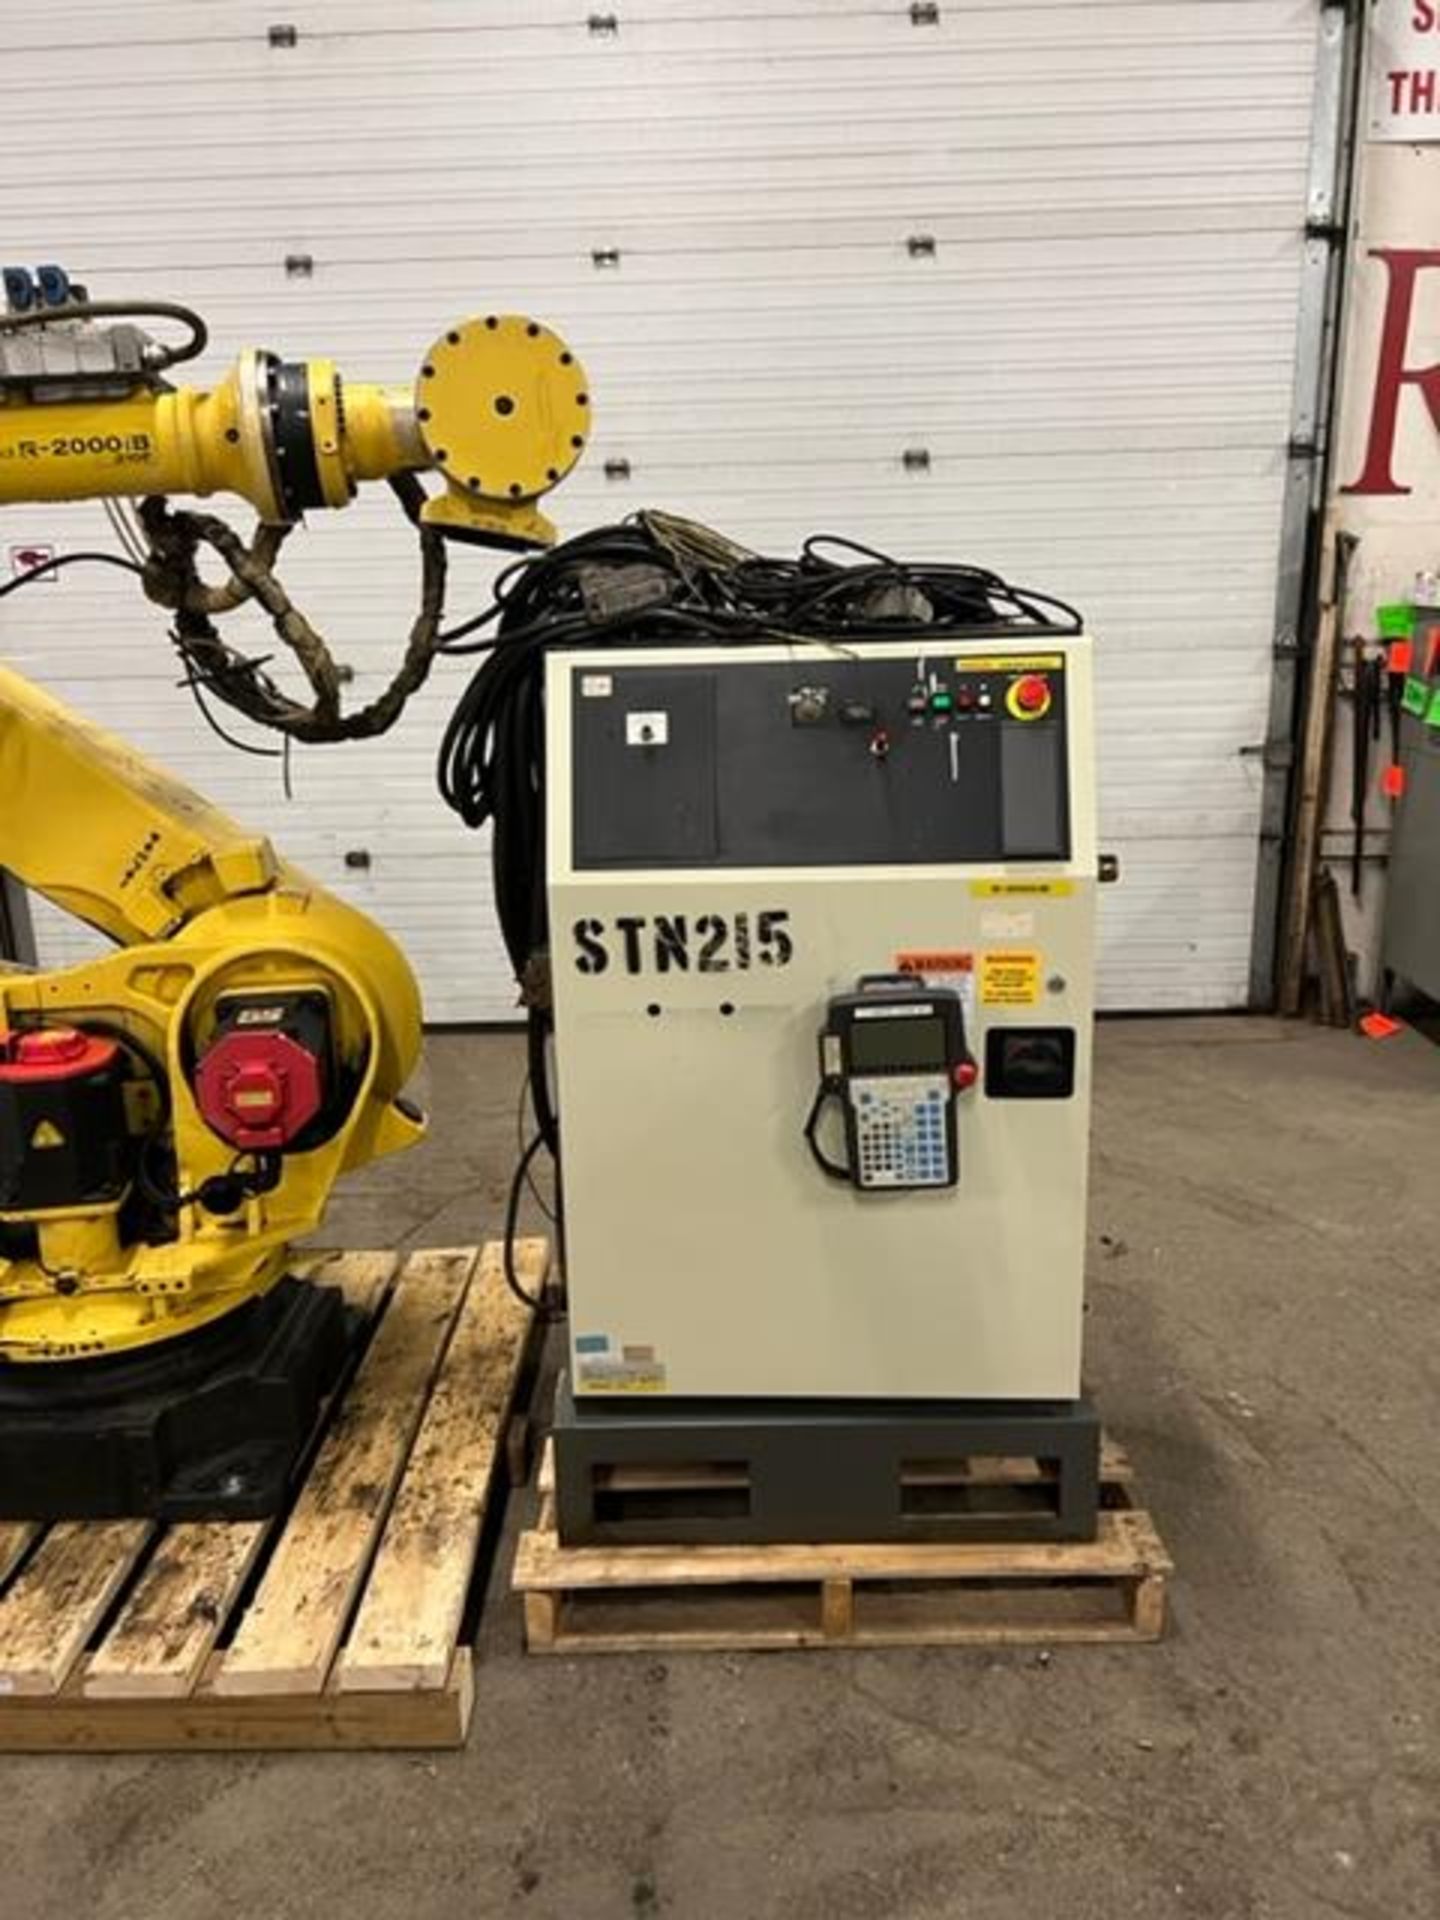 MINT 2012 Fanuc Handling Robot Model R-2000iB 210F - 210kg payload with R-30iA Controller and - Image 4 of 5